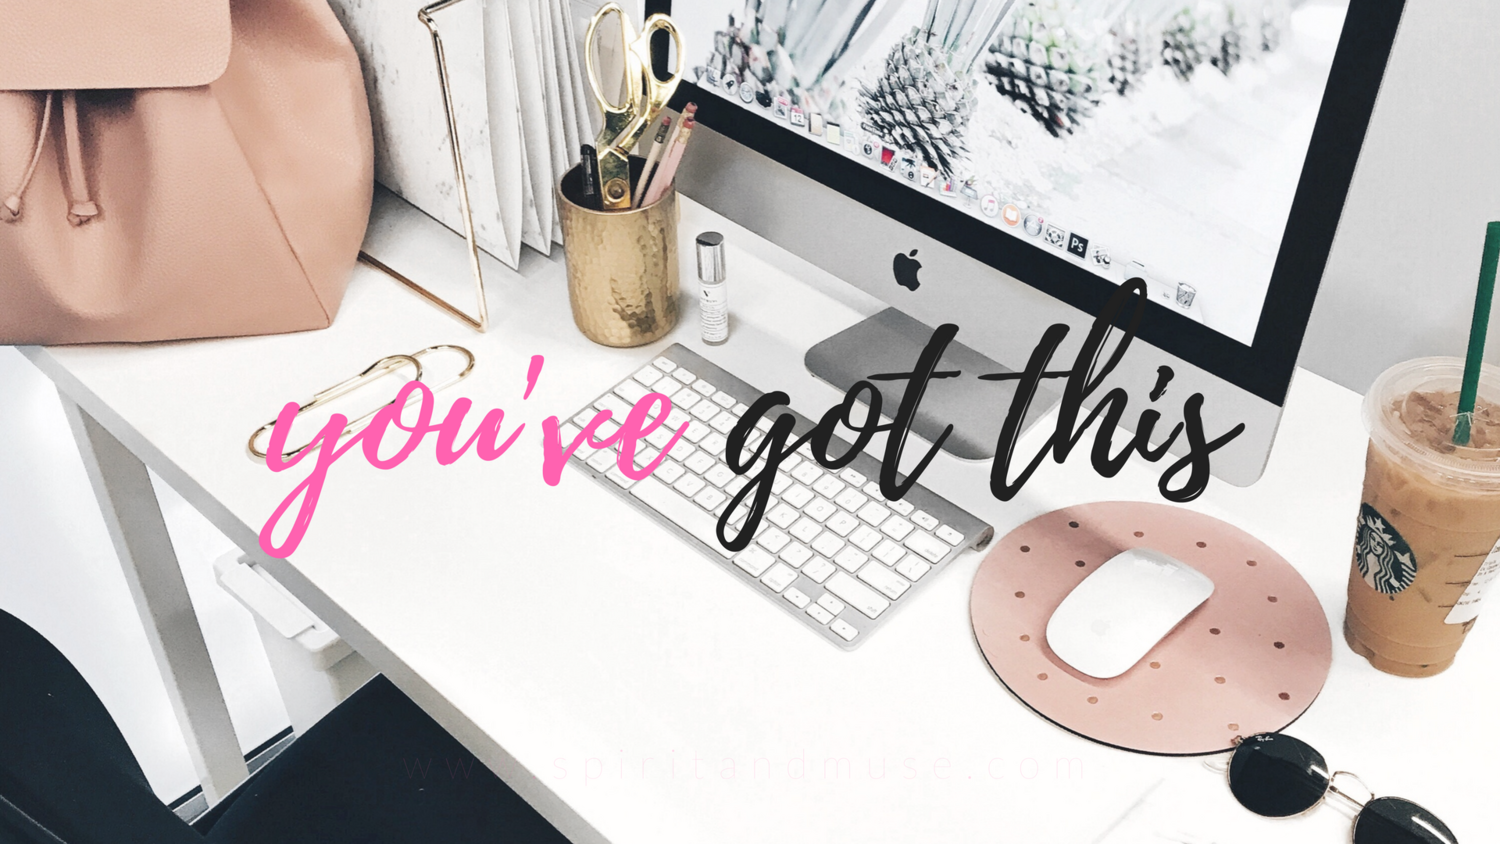 Boss Lady, you've got this! Click the link to download this free desktop wallpaper & to view the r. Girl boss wallpaper, Free desktop wallpaper, Desktop wallpaper